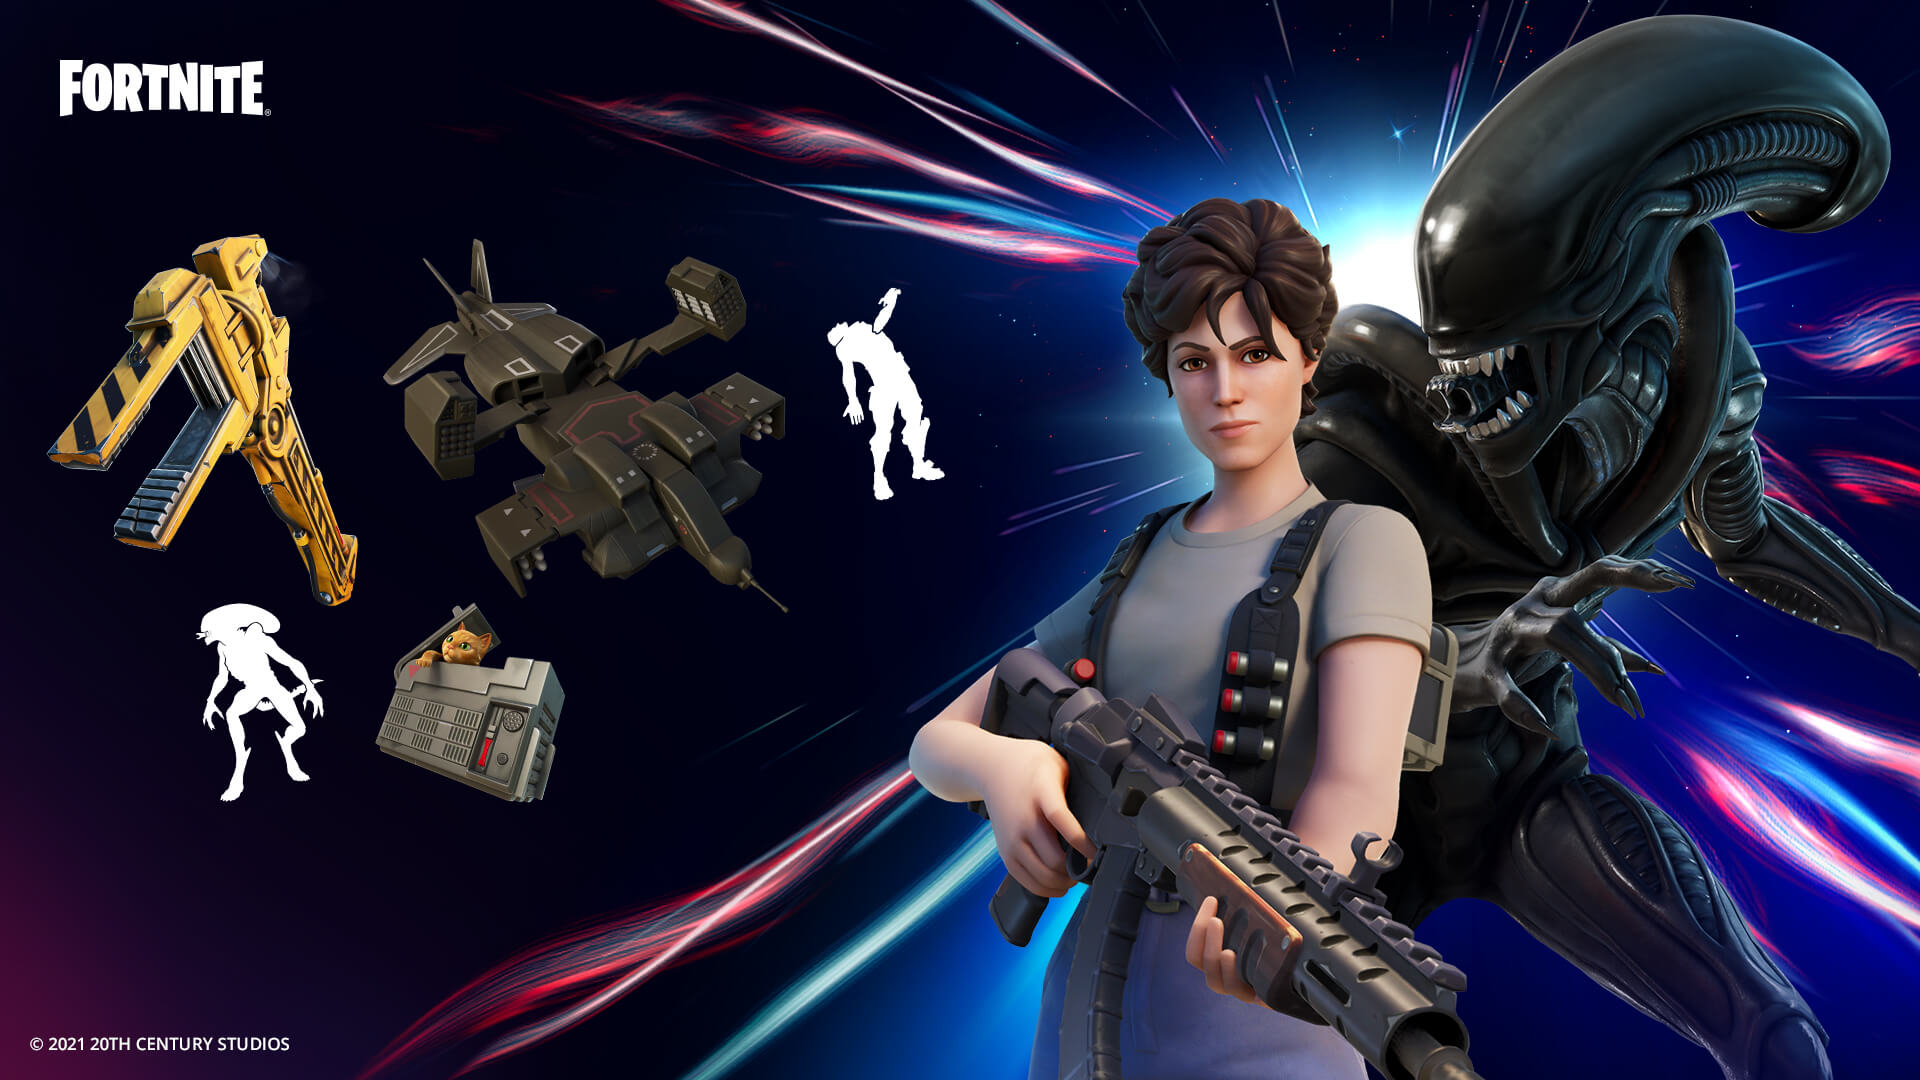 Fortnite': 'Aliens' Bundle With Xenomorph and Ripley Now Available! [Trailer]  - Bloody Disgusting